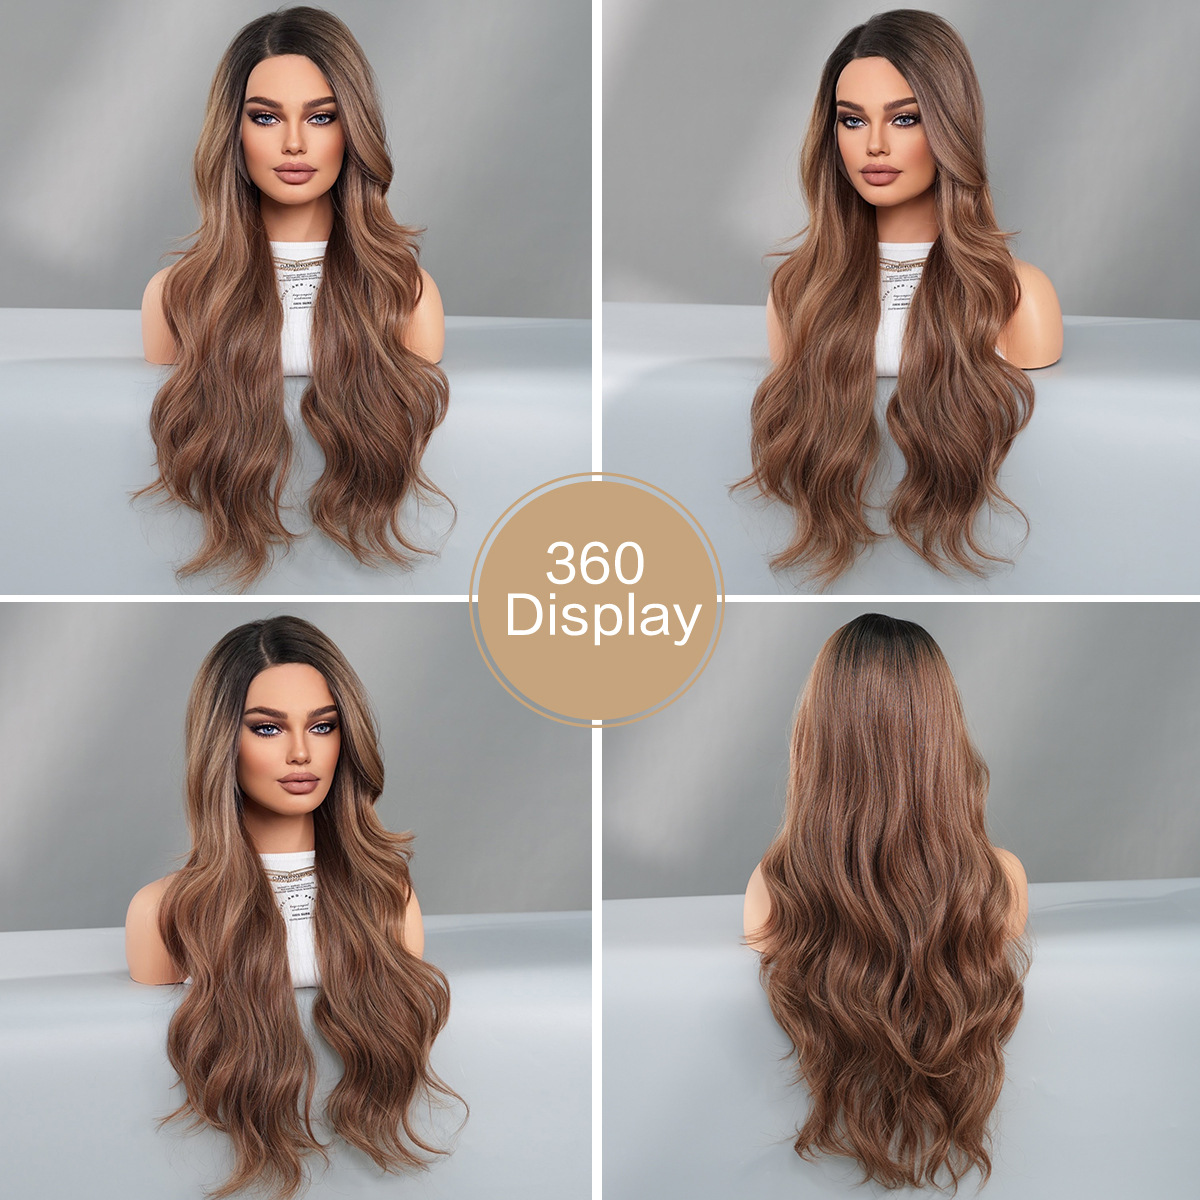 A synthetic wig with wavy mocha brown highlighted hair, featuring a side split and fiber T-part lace